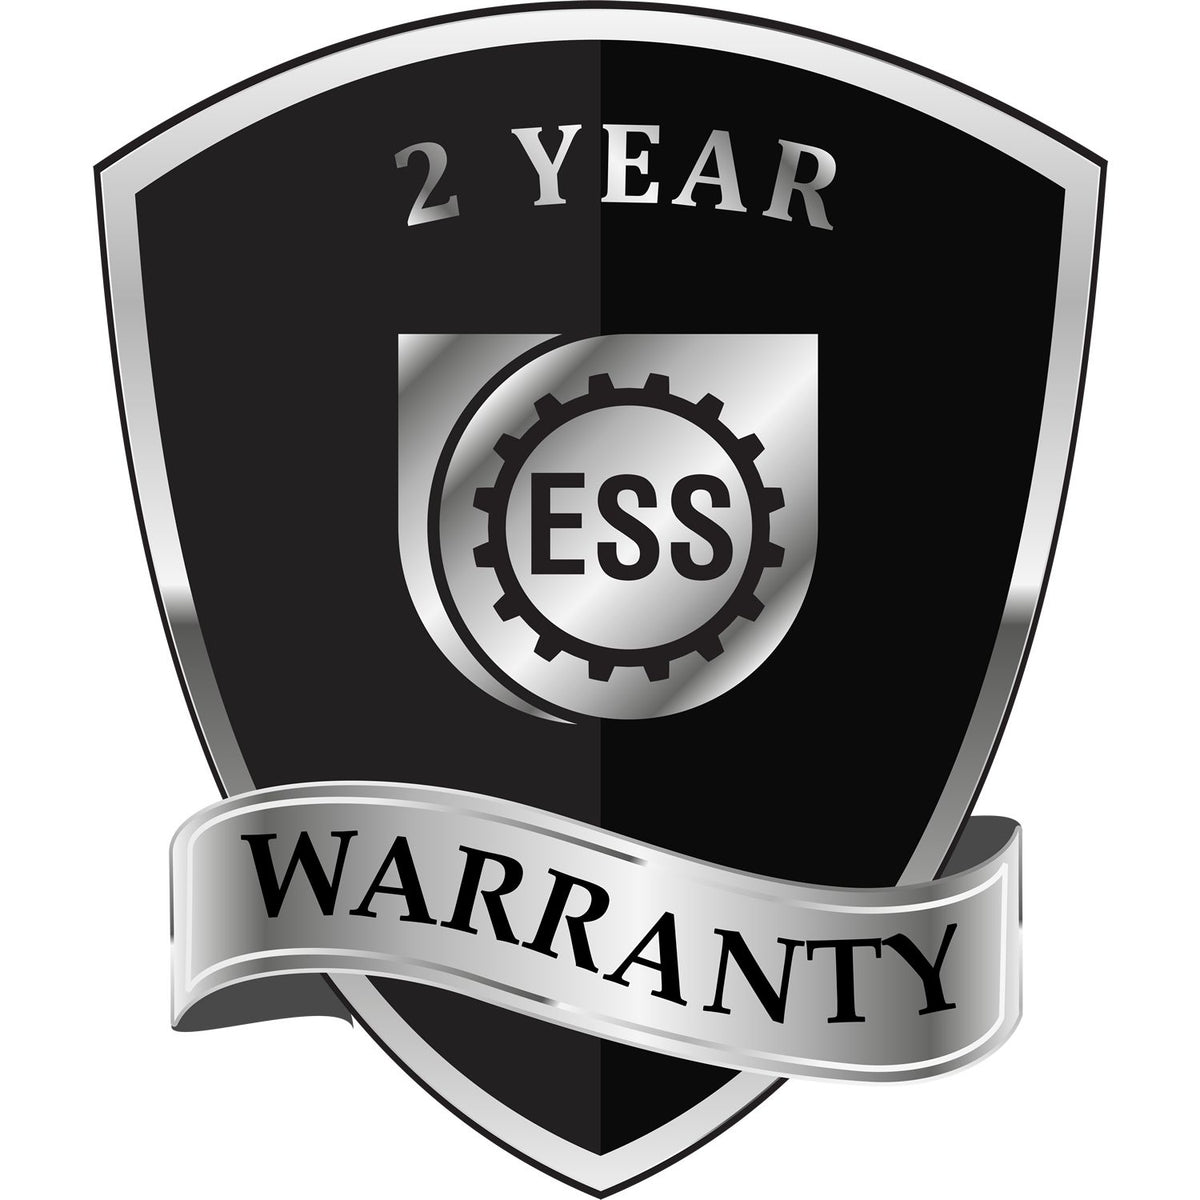 A black and silver badge or emblem showing warranty information for the Gift Tennessee Engineer Seal